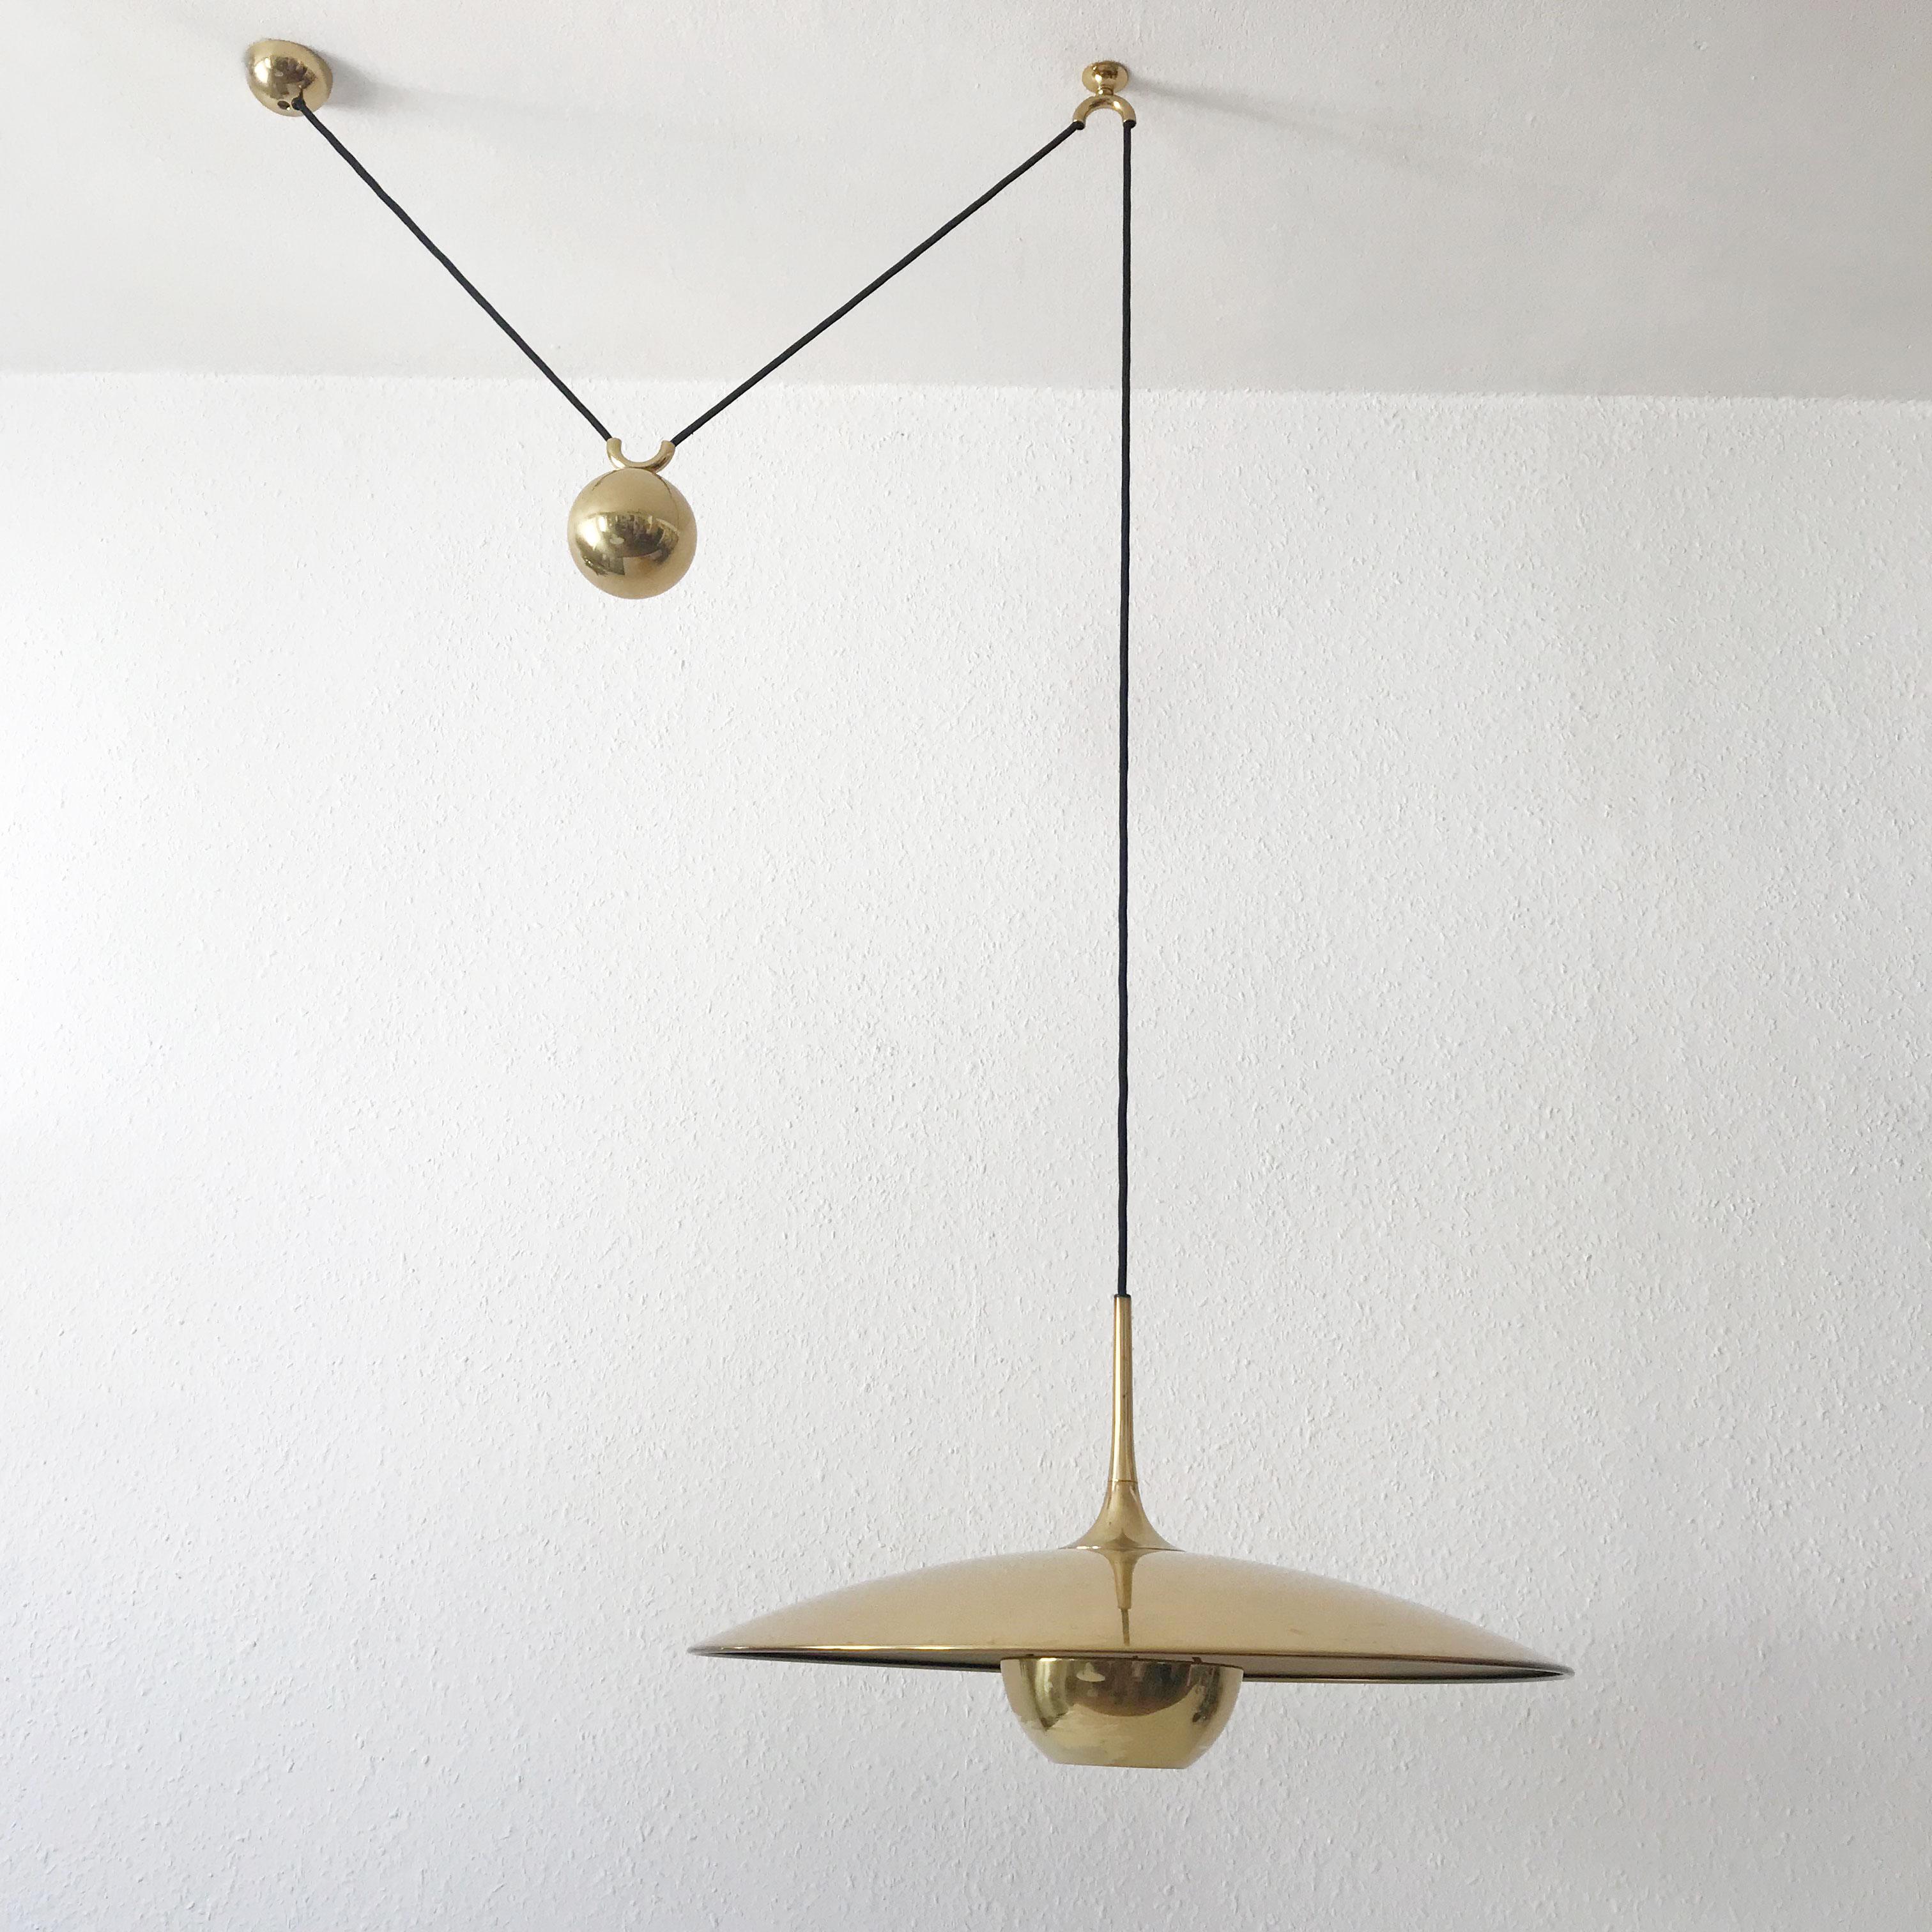 Late 20th Century Counter Balance Pendant Lamp Onos 55 by Florian Schulz, 1980s, Germany